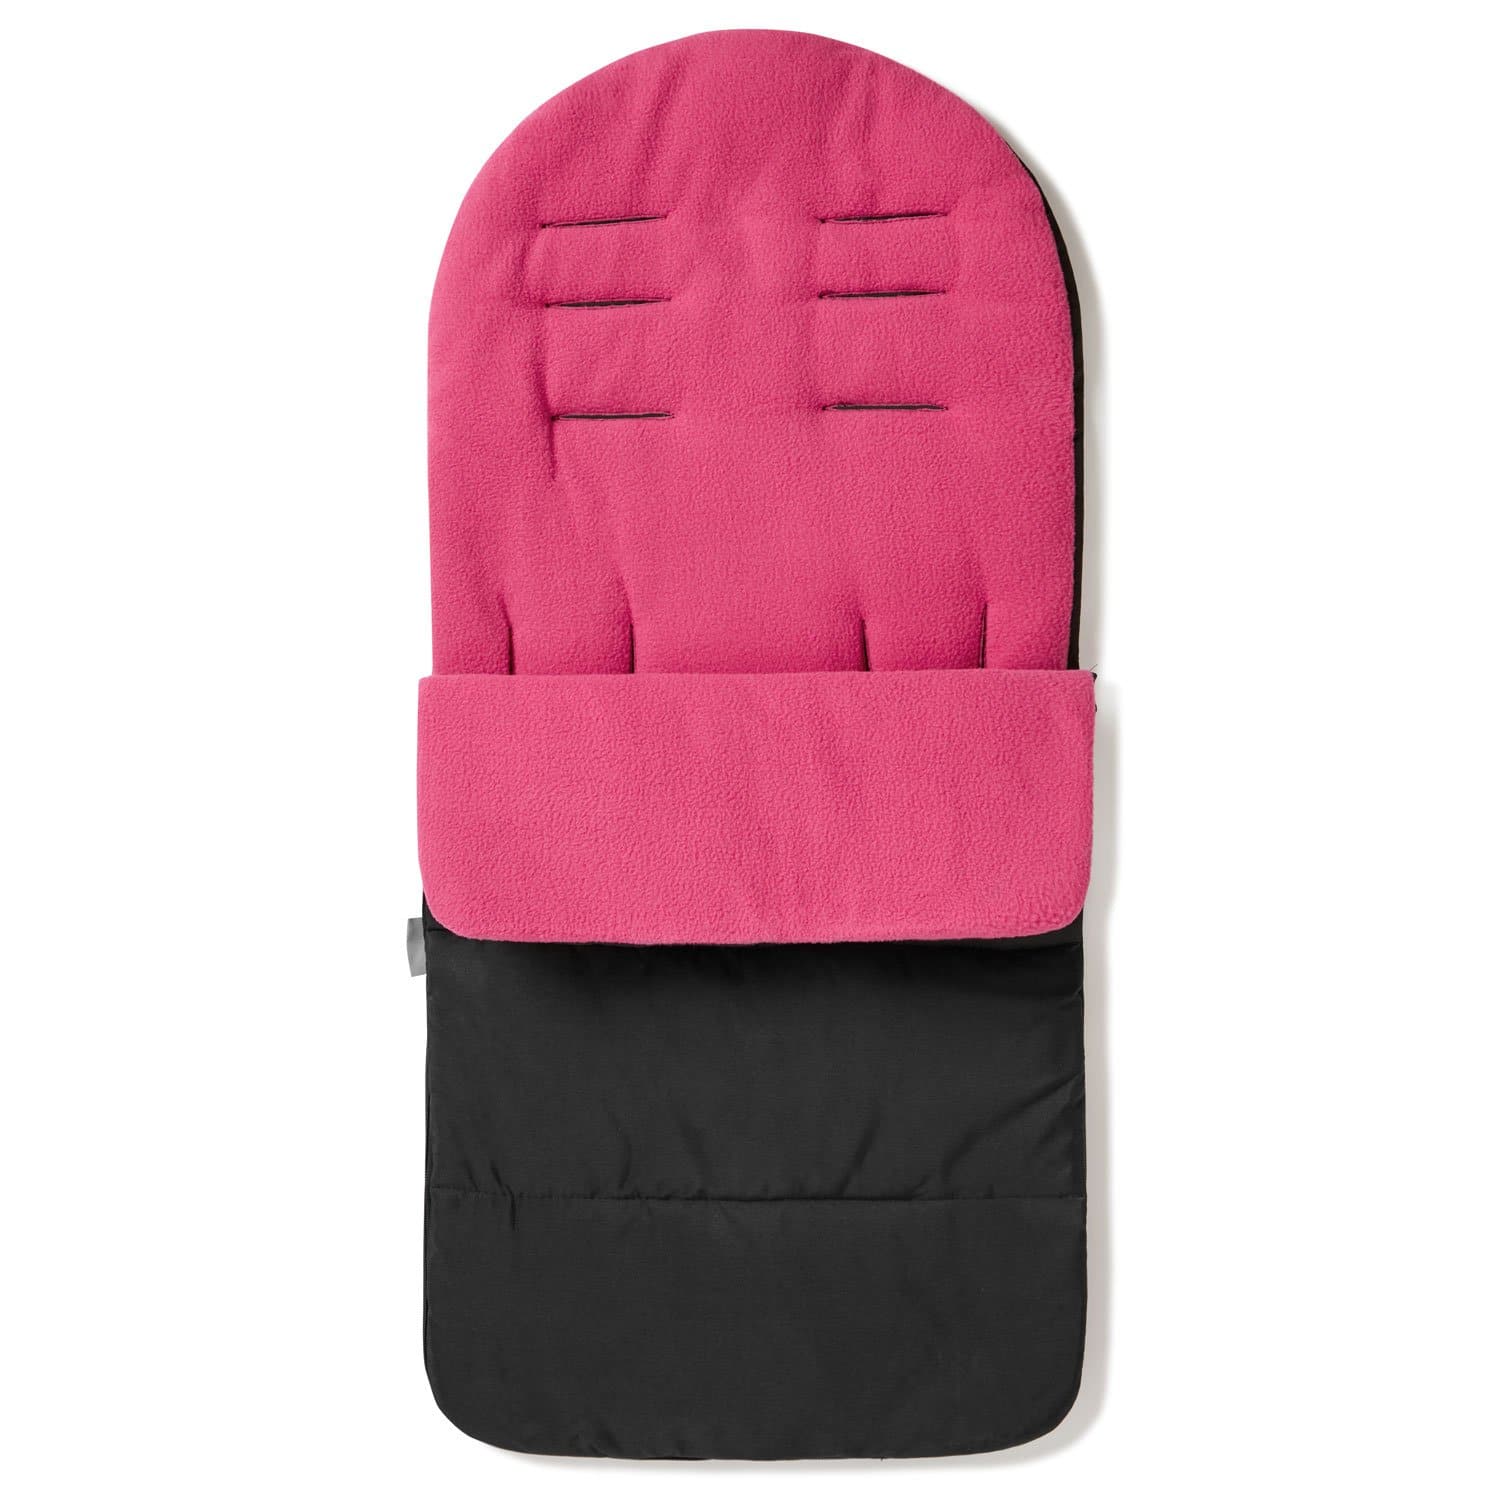 Premium Footmuff / Cosy Toes Compatible with Joie - Pink Rose / Fits All Models | For Your Little One